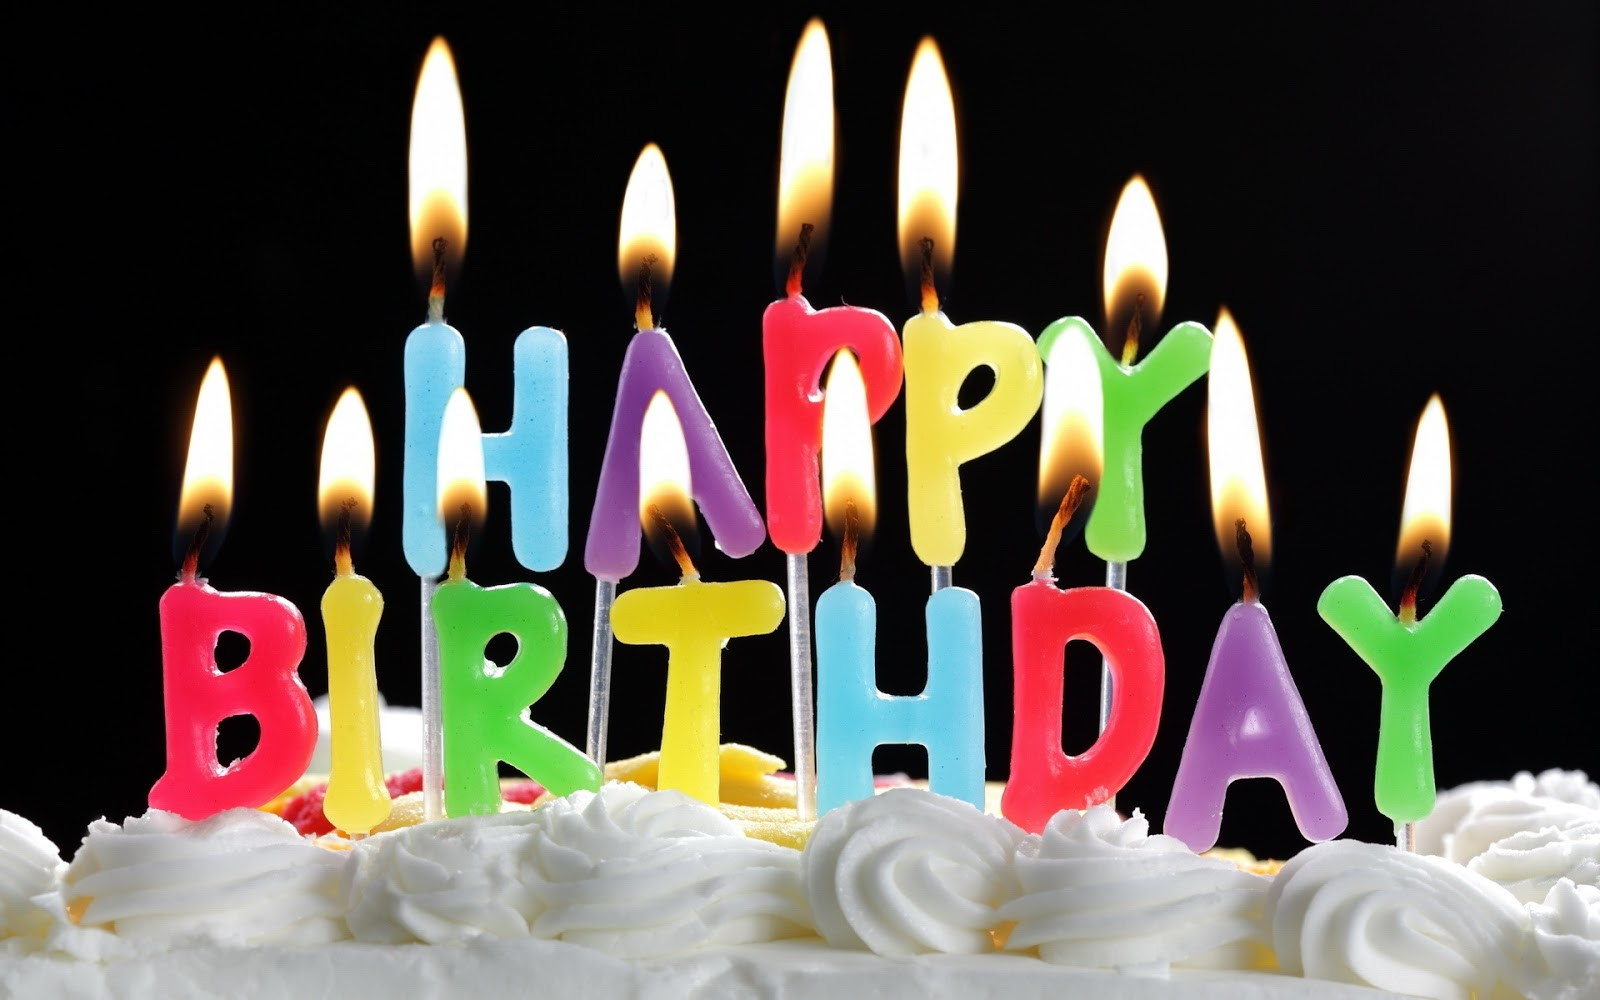 Happy Birthday Wishes Images Free Download
 happy birthday greetings wishes high resolution hd 2013